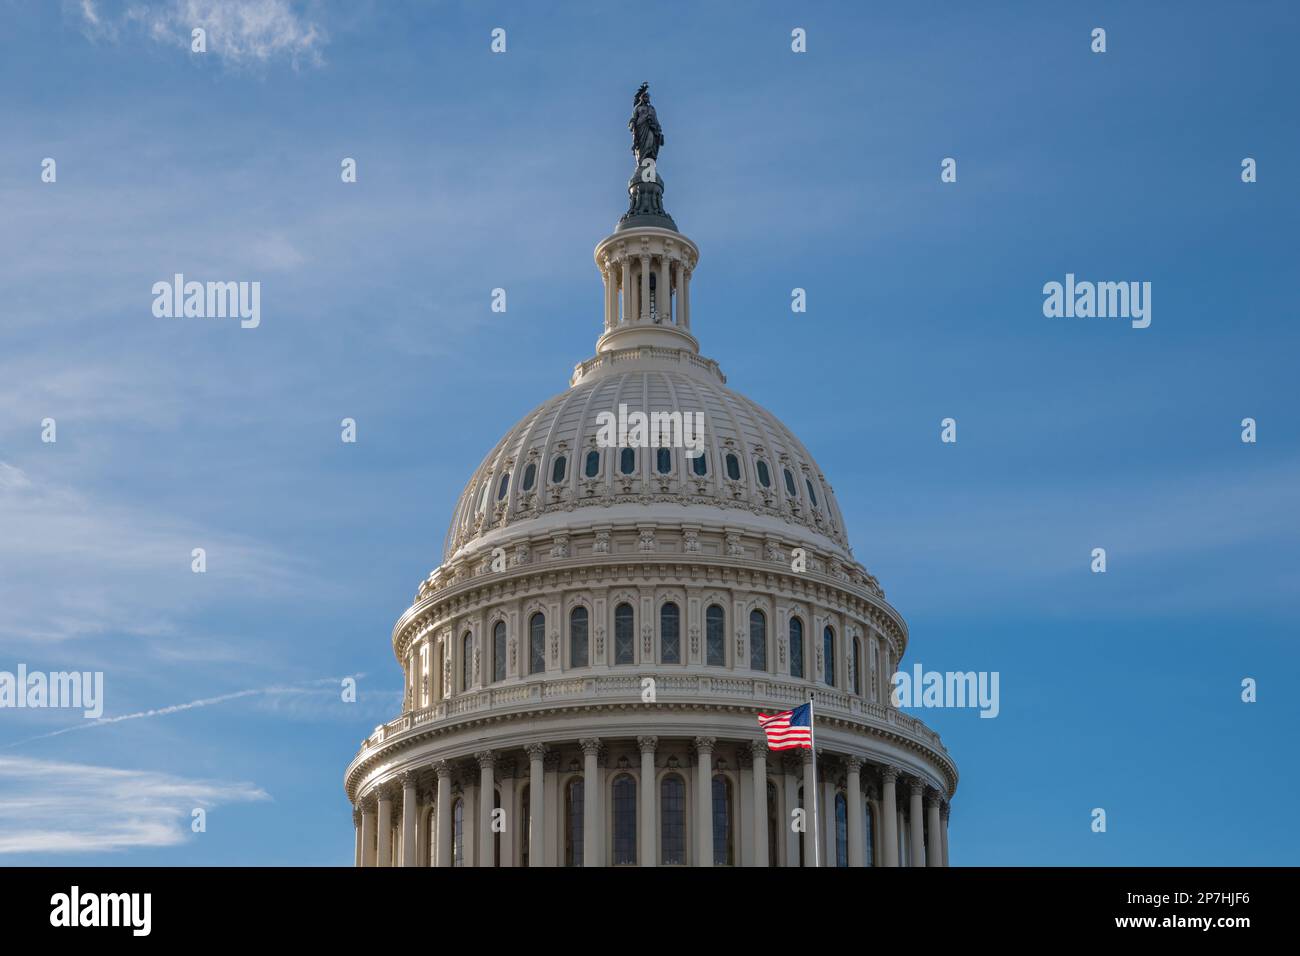 United States Capitol Dome with bright blue sky in background with copy space. Stock Photo